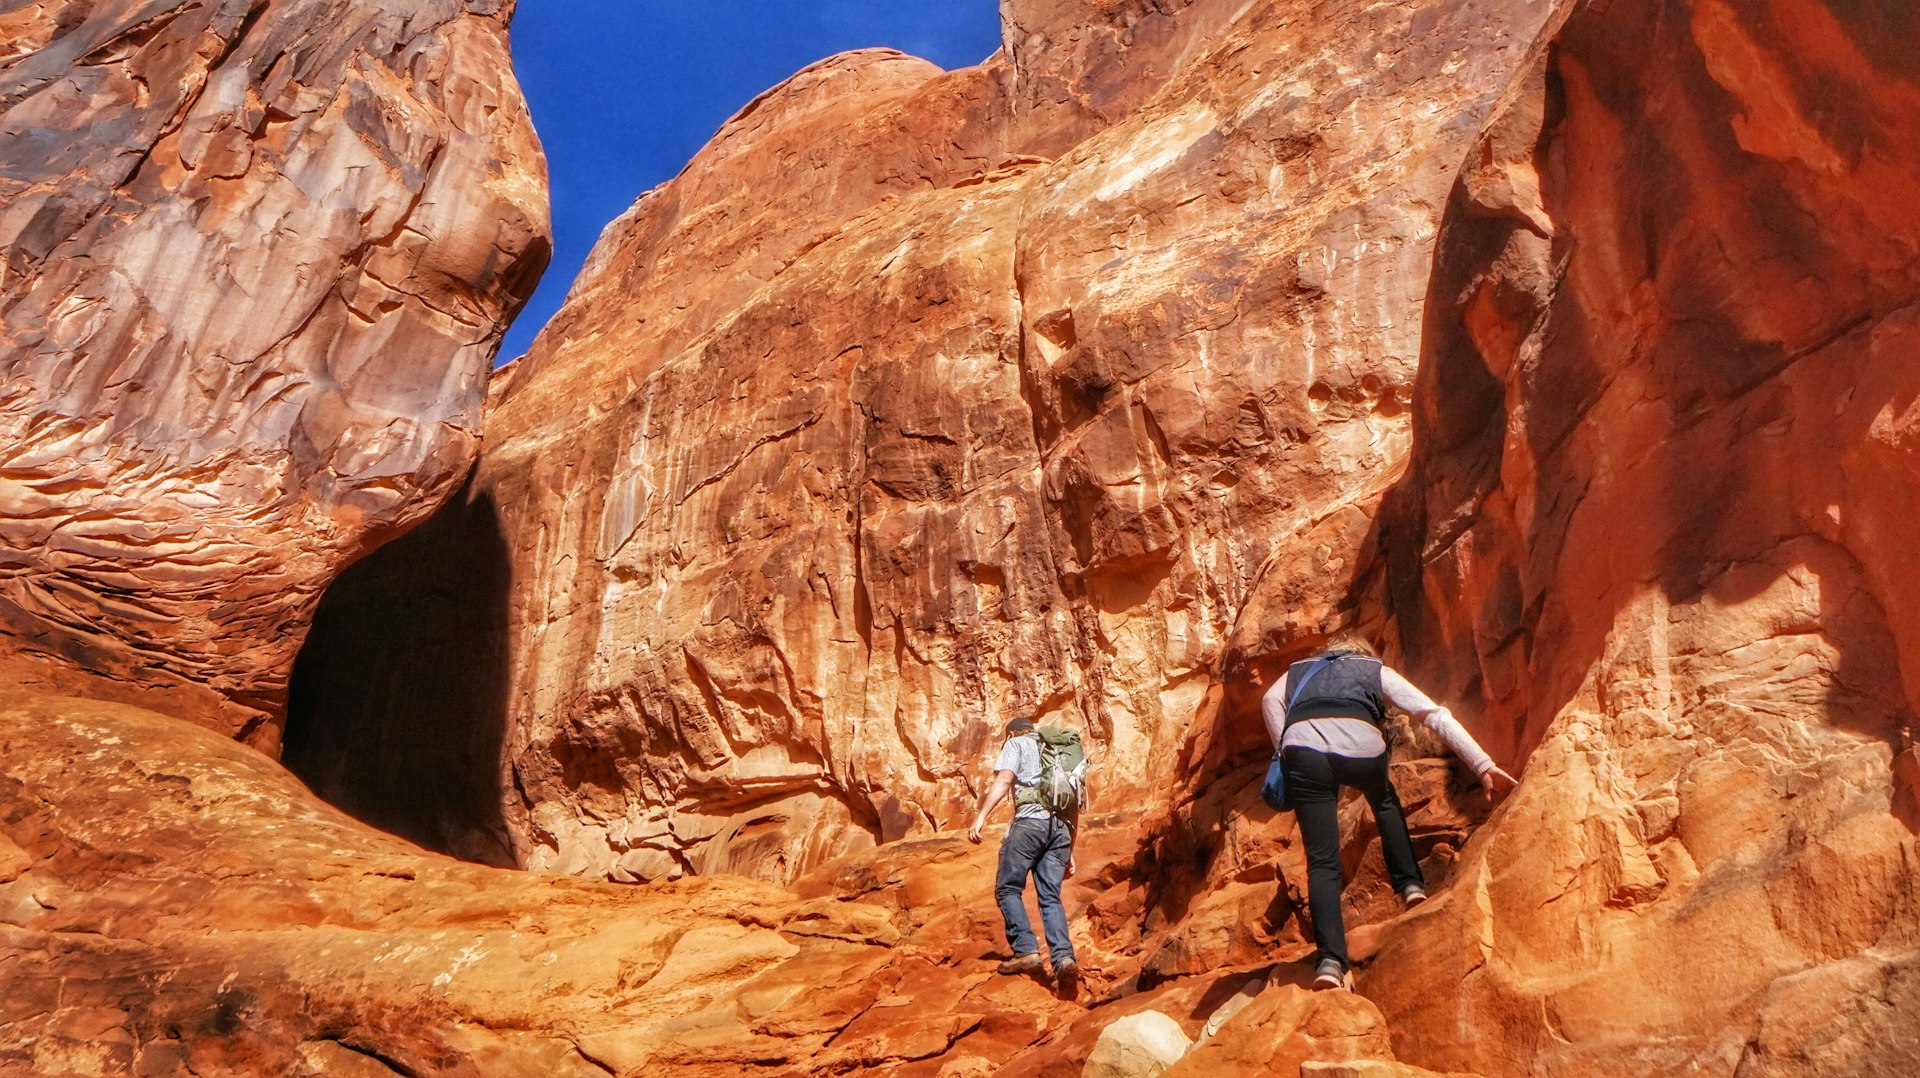 Two hikers climb rocks on the Fiery Furnace backcountry trail in Arches National Park, Utah